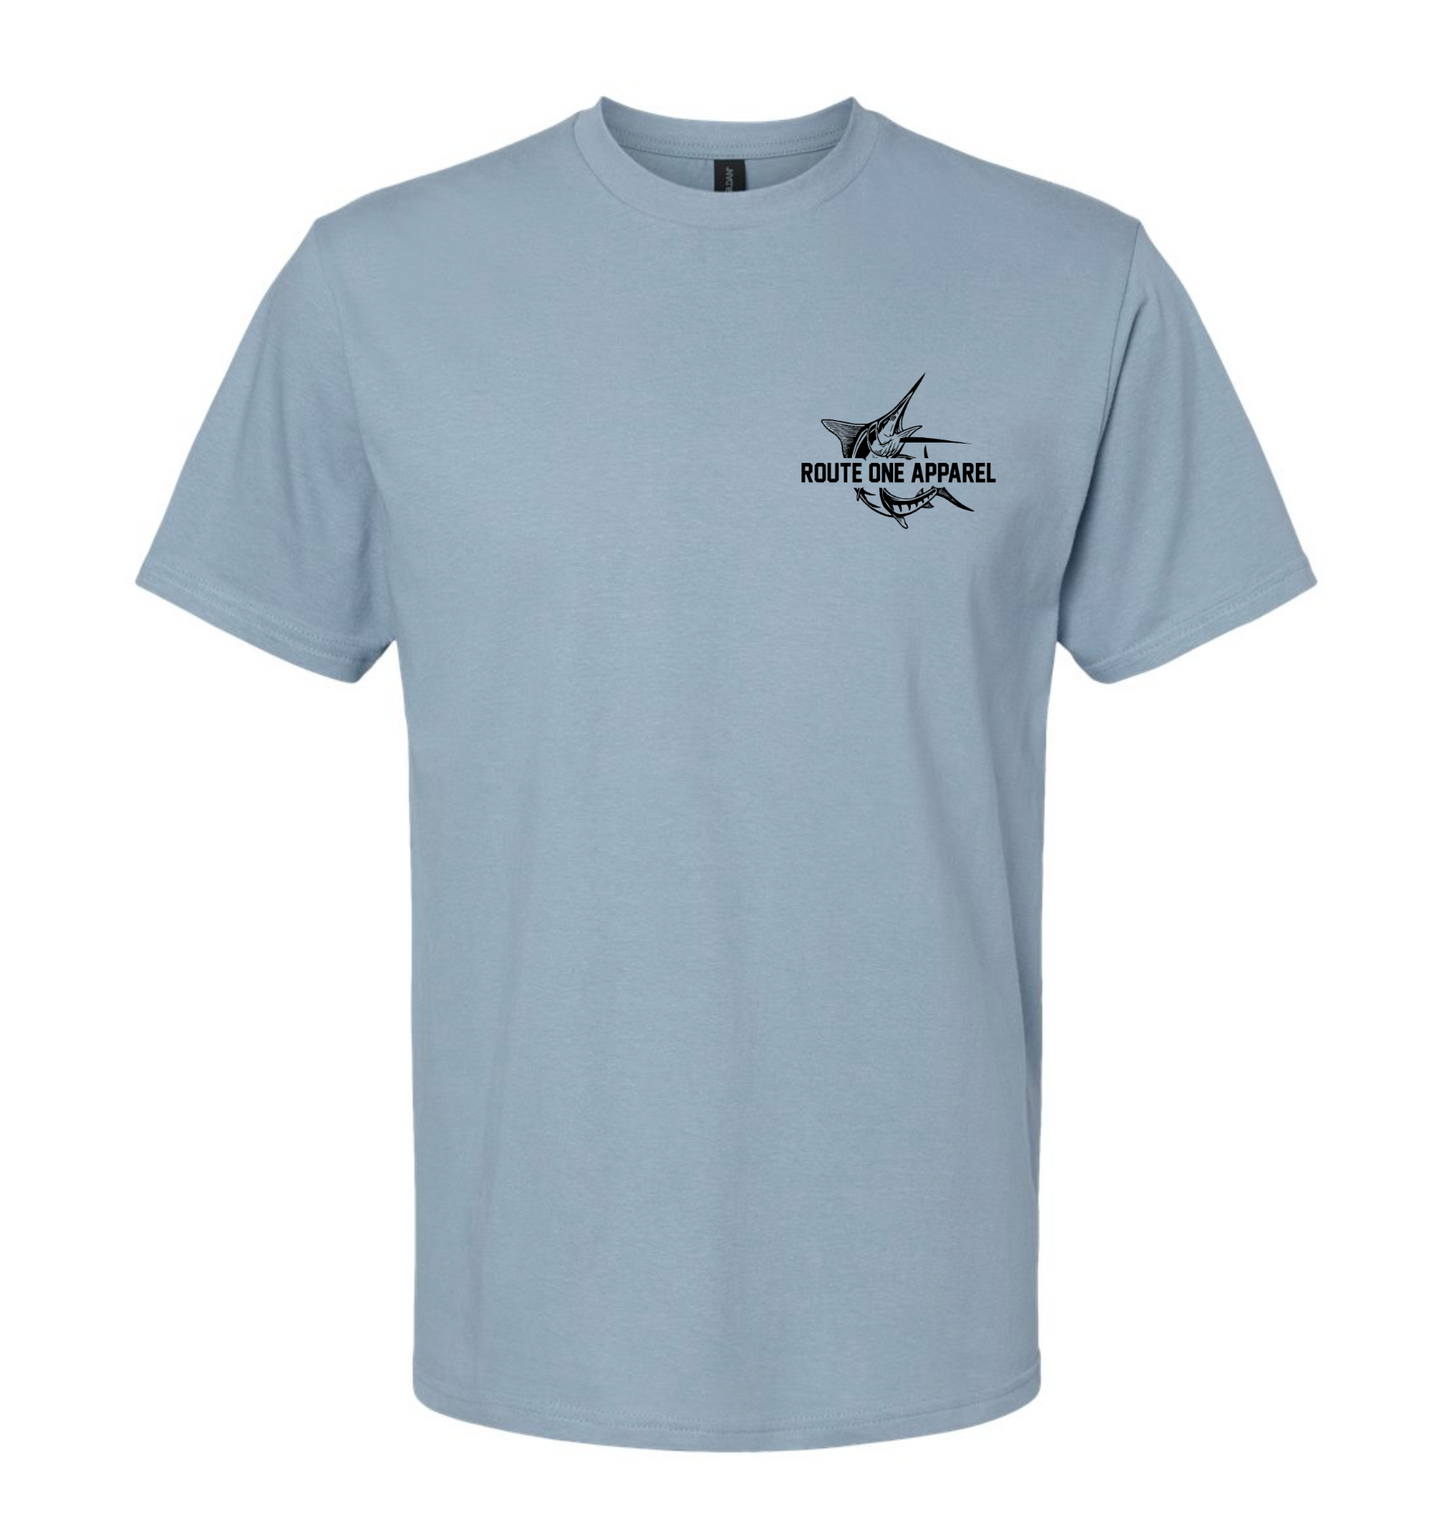 *PRE-ORDER* White Marlin OLD BAY Pride (Stone Blue) / Shirt - Route One Apparel